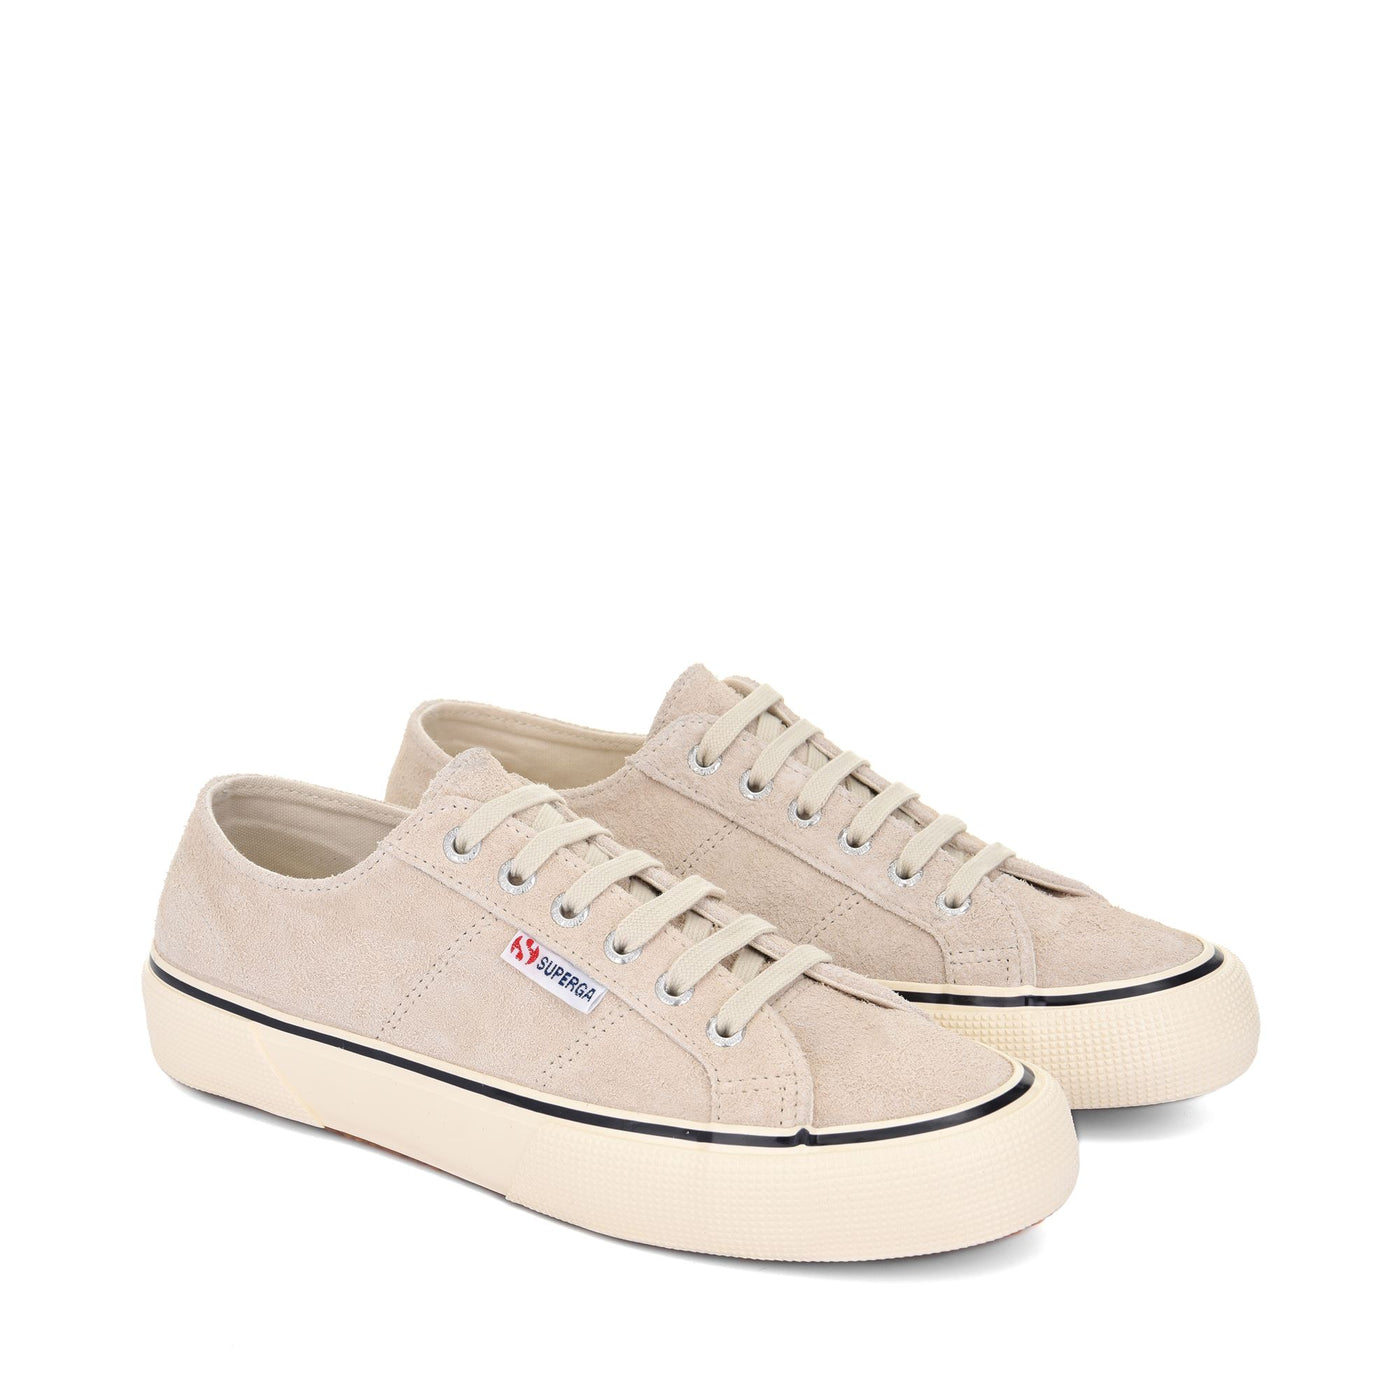 Le Superga Unisex 2490 BOLD HAIRY SUEDE Sneaker WHITE MILK Dressed Front (jpg Rgb)	